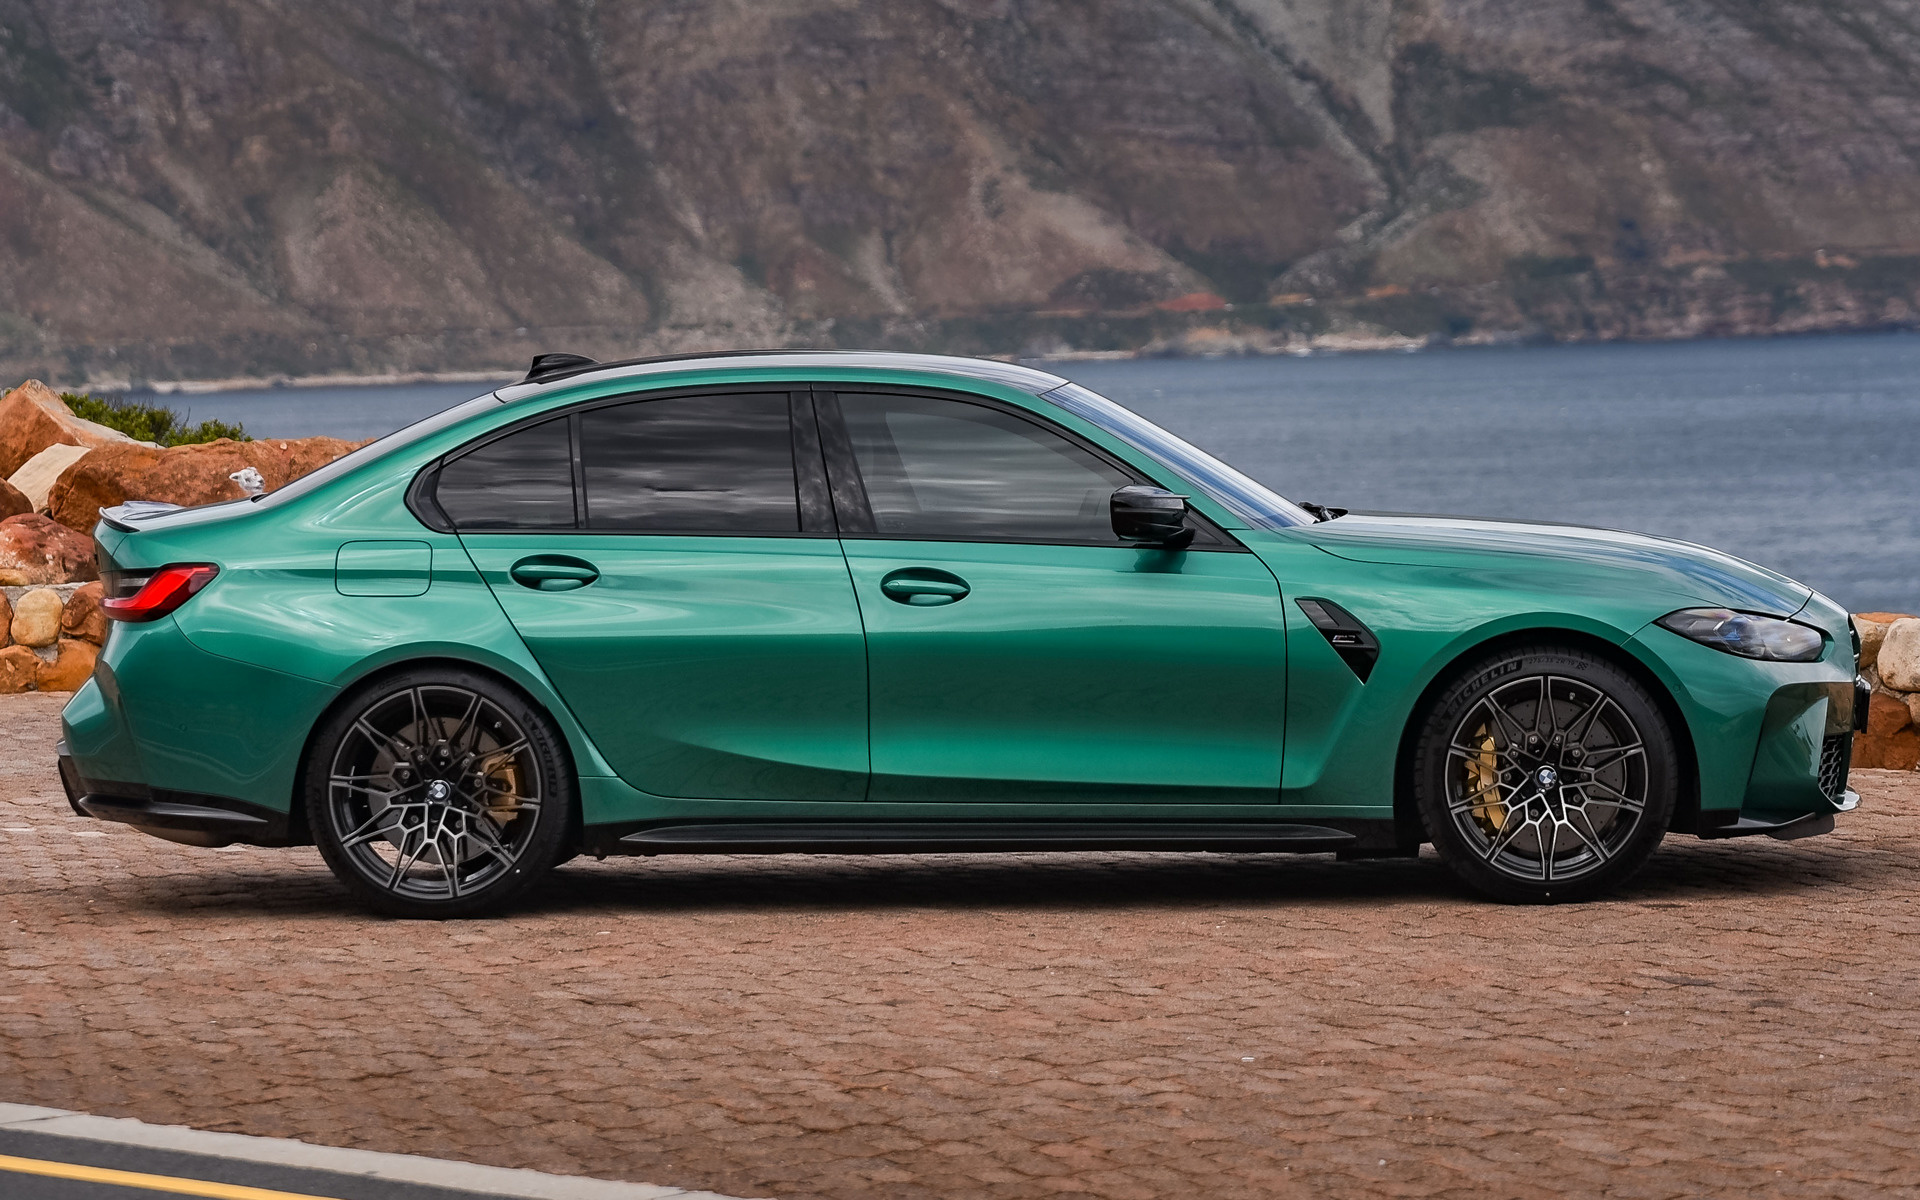 Bmw competition 2021. BMW m3 Competition 2021. БМВ м3 Competition 2021. BMW m3 Competition 2022. BMW m3 g80 Competition.